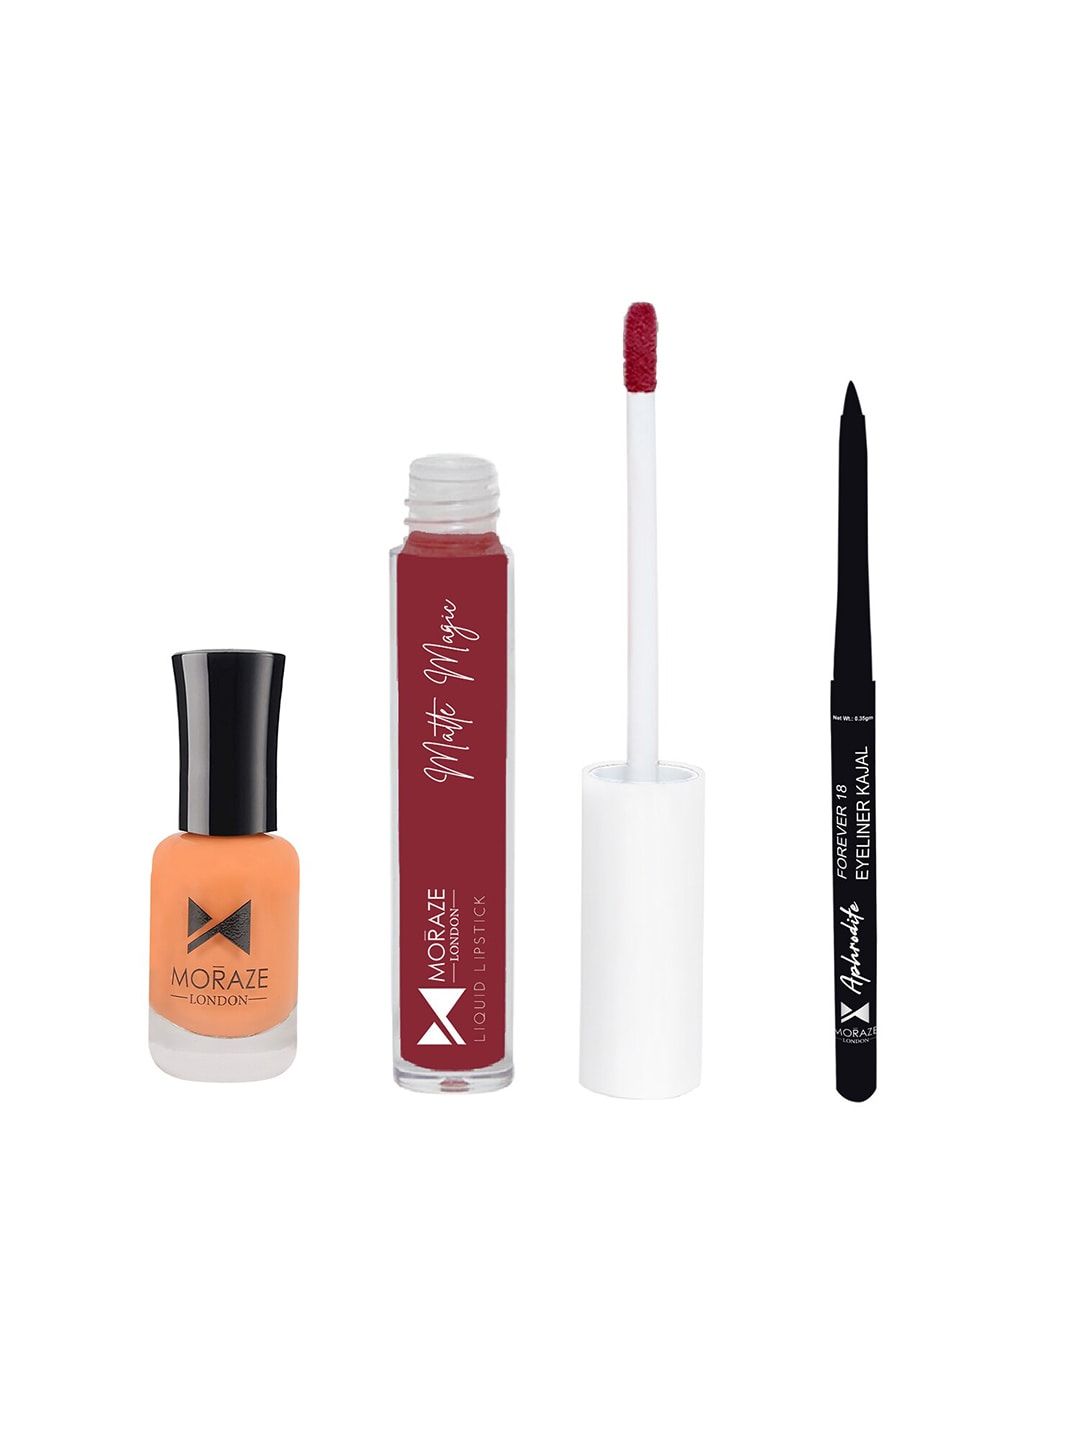 Moraze Pack Nude Nail Polish (Autumn) With Lipstick (No Regret) and Kajal Price in India